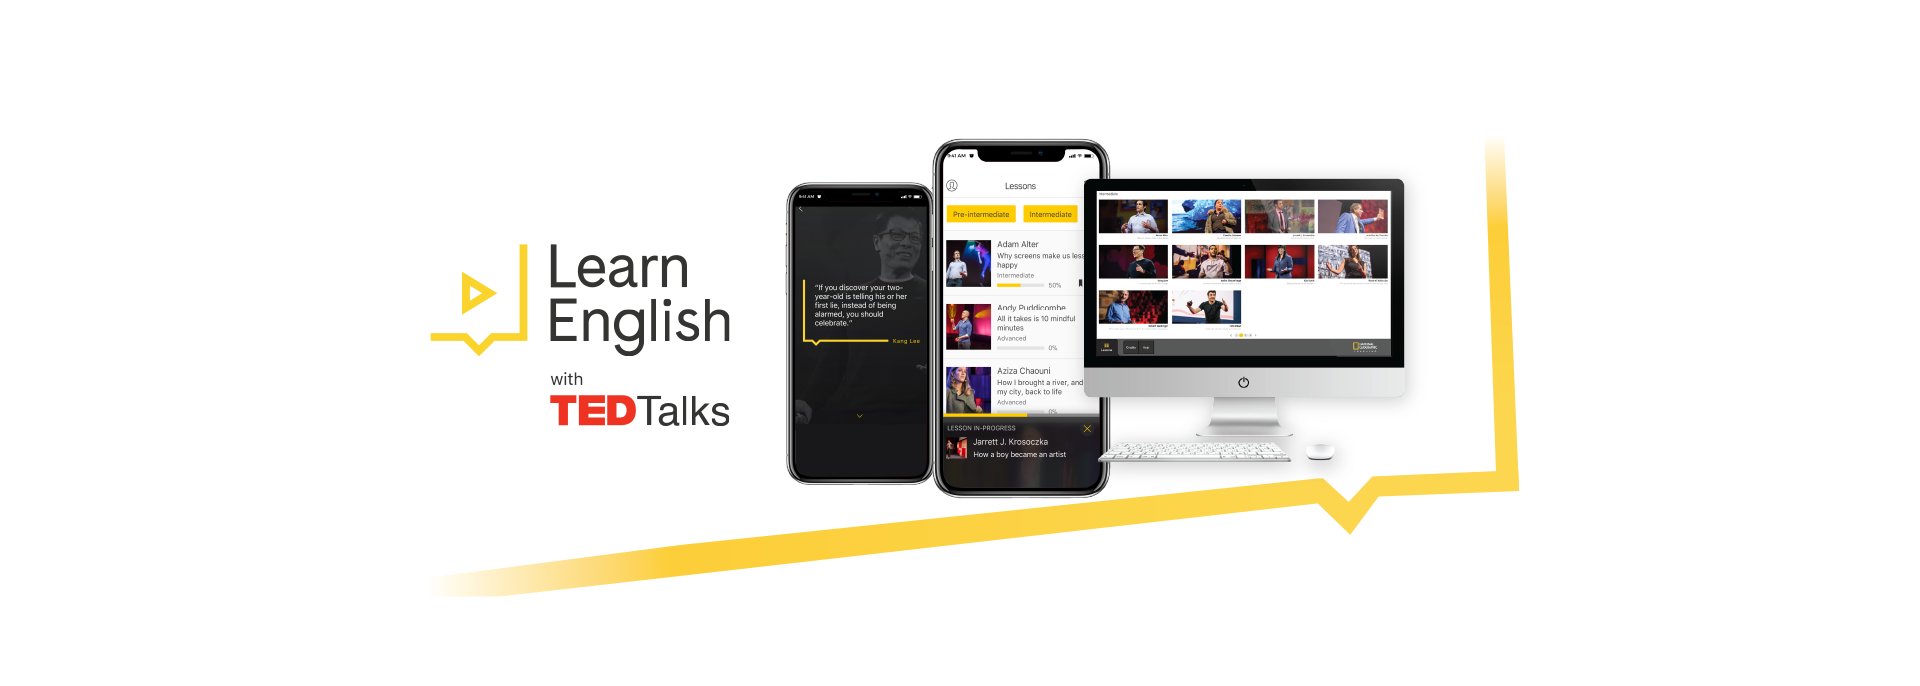 Learn English with TED talks